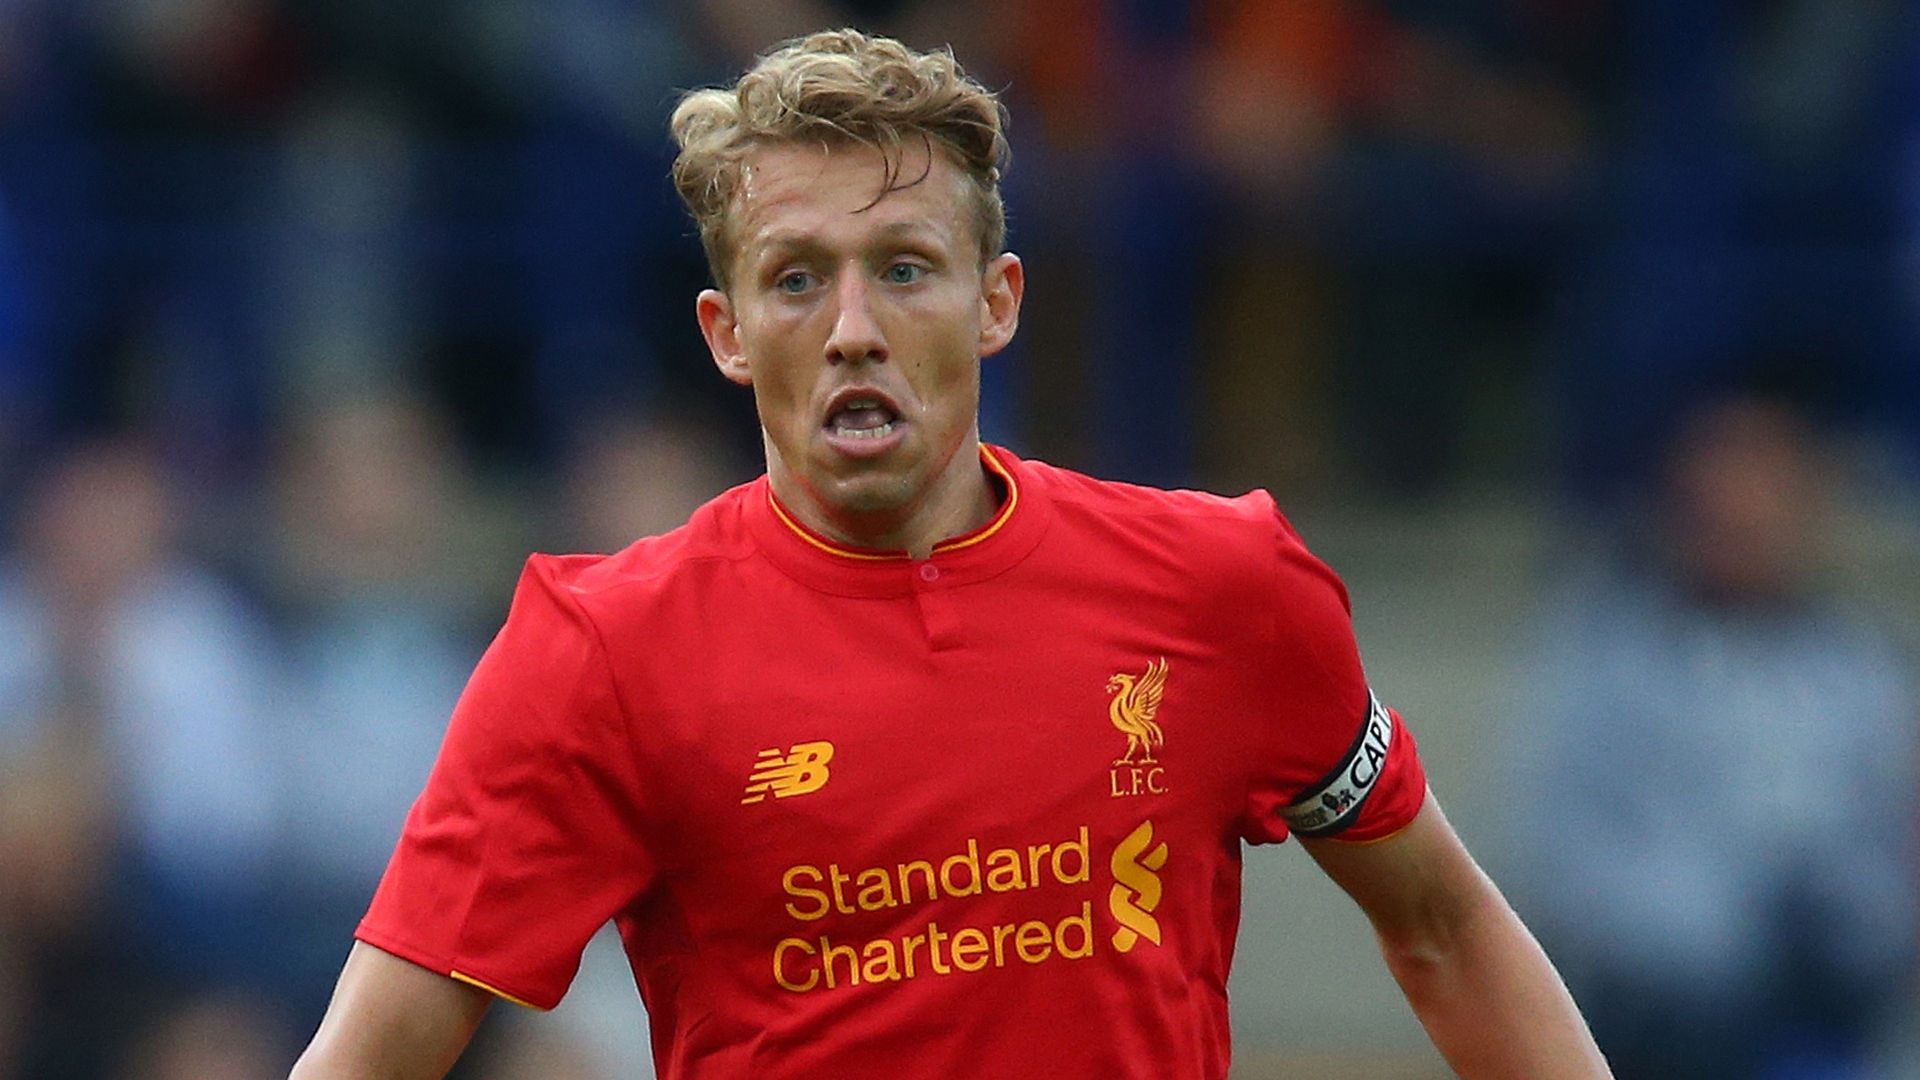 Lucas has no regrets over Liverpool exit after growing unhappy at Anfield